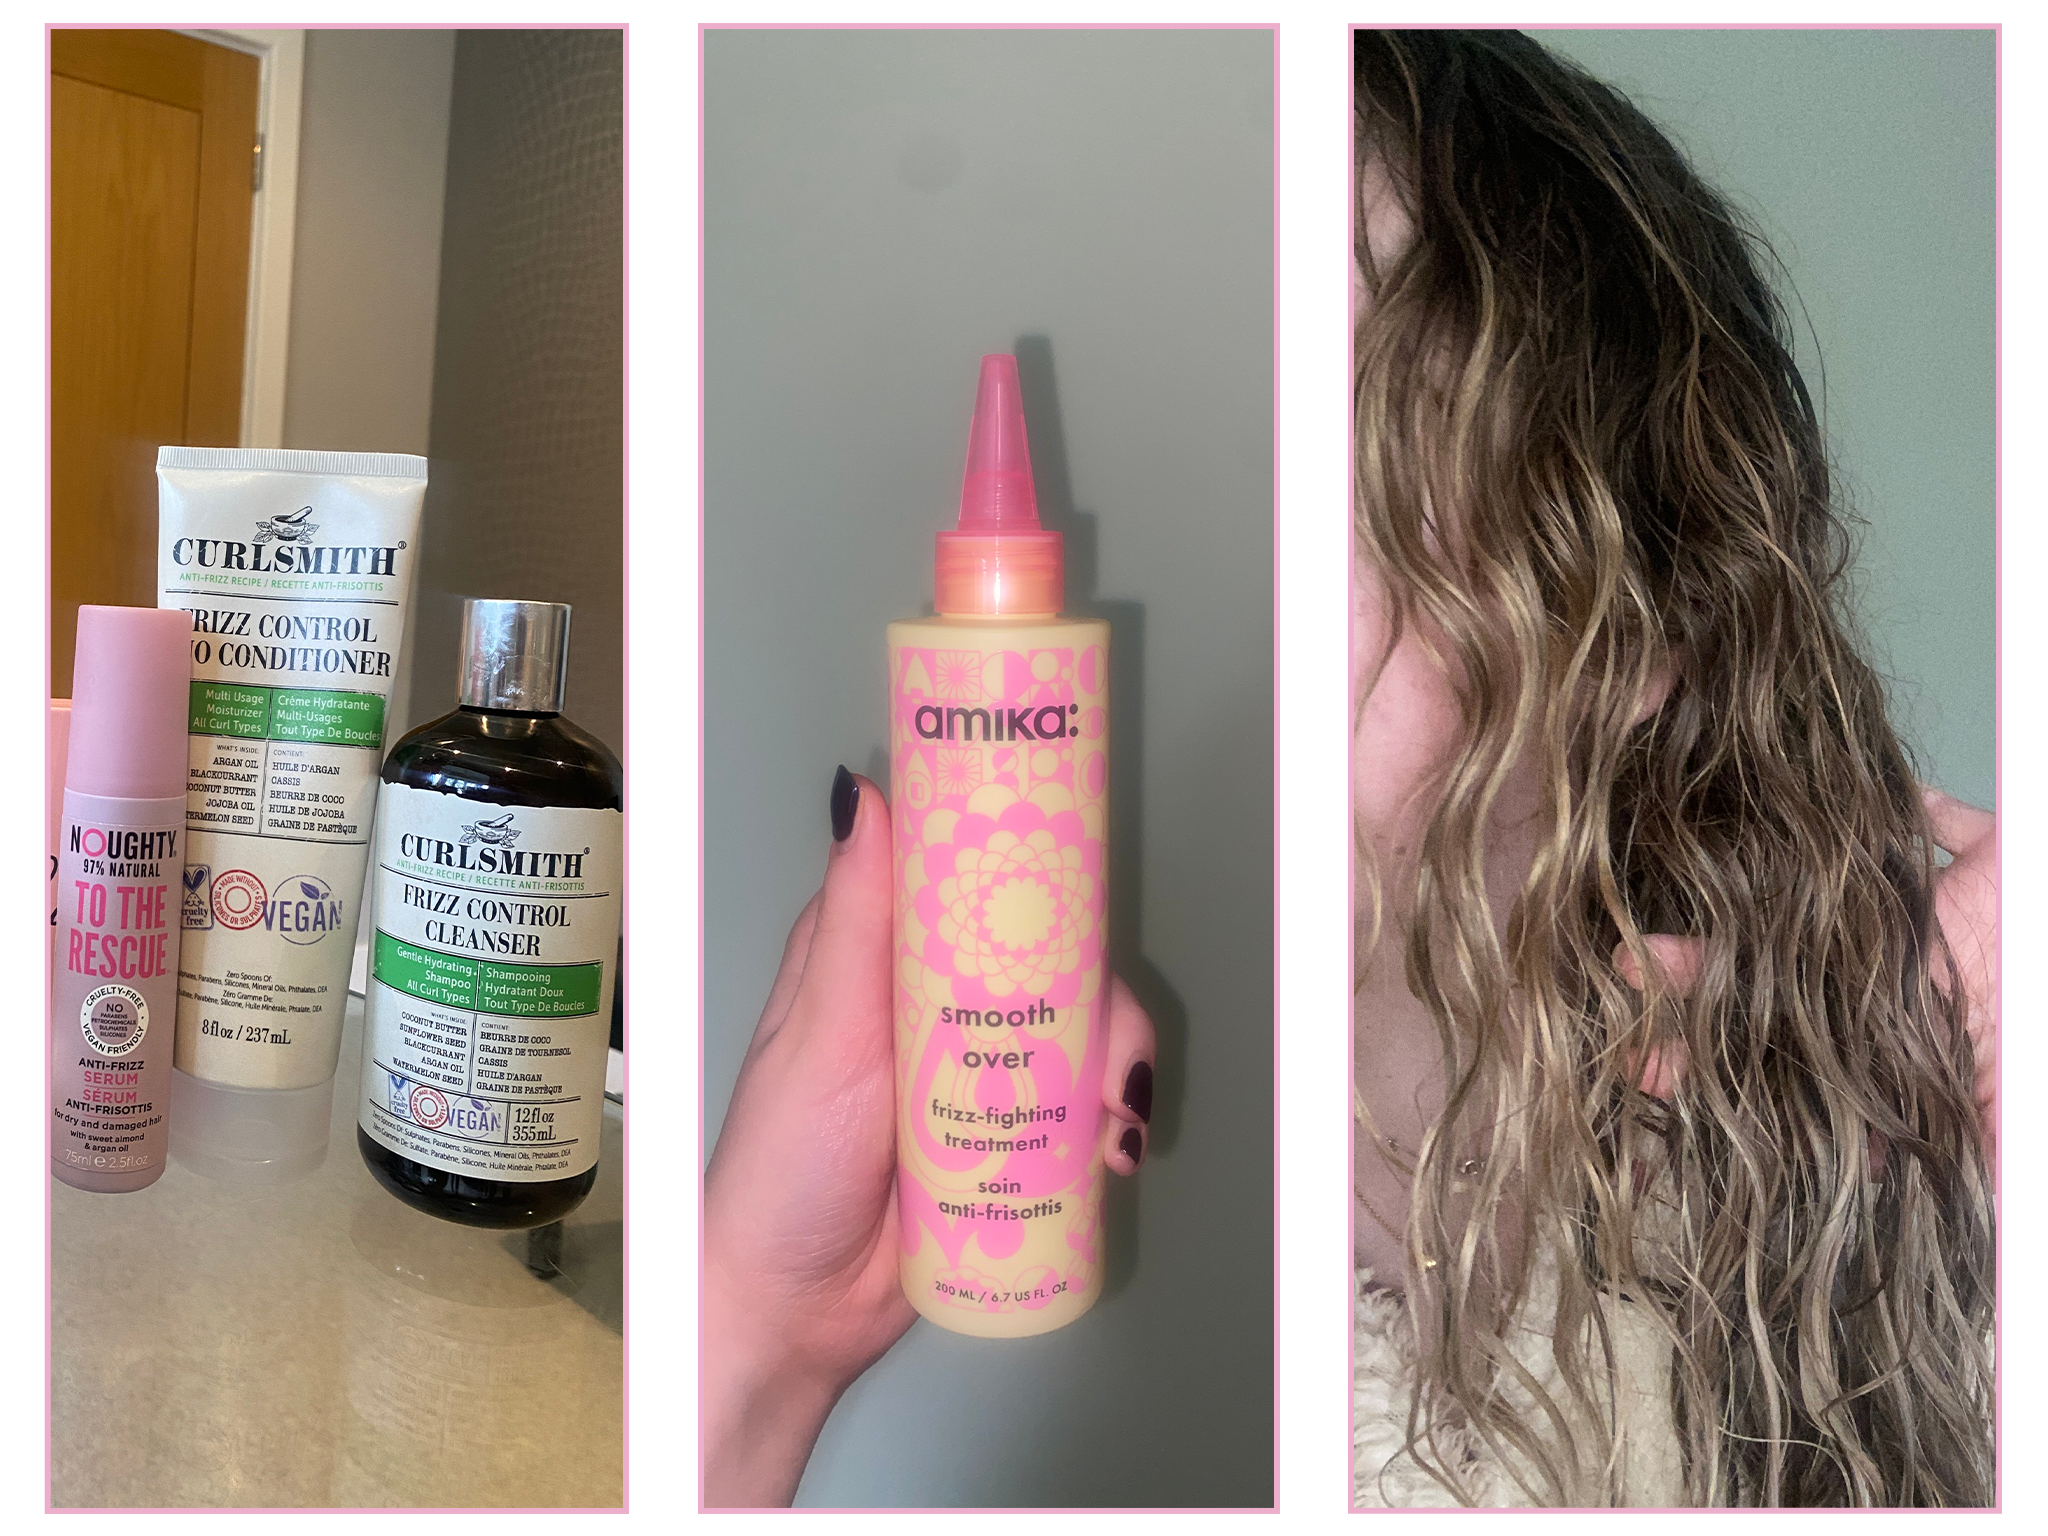 Our tester used a range of anti-frizz products over the course of a few months